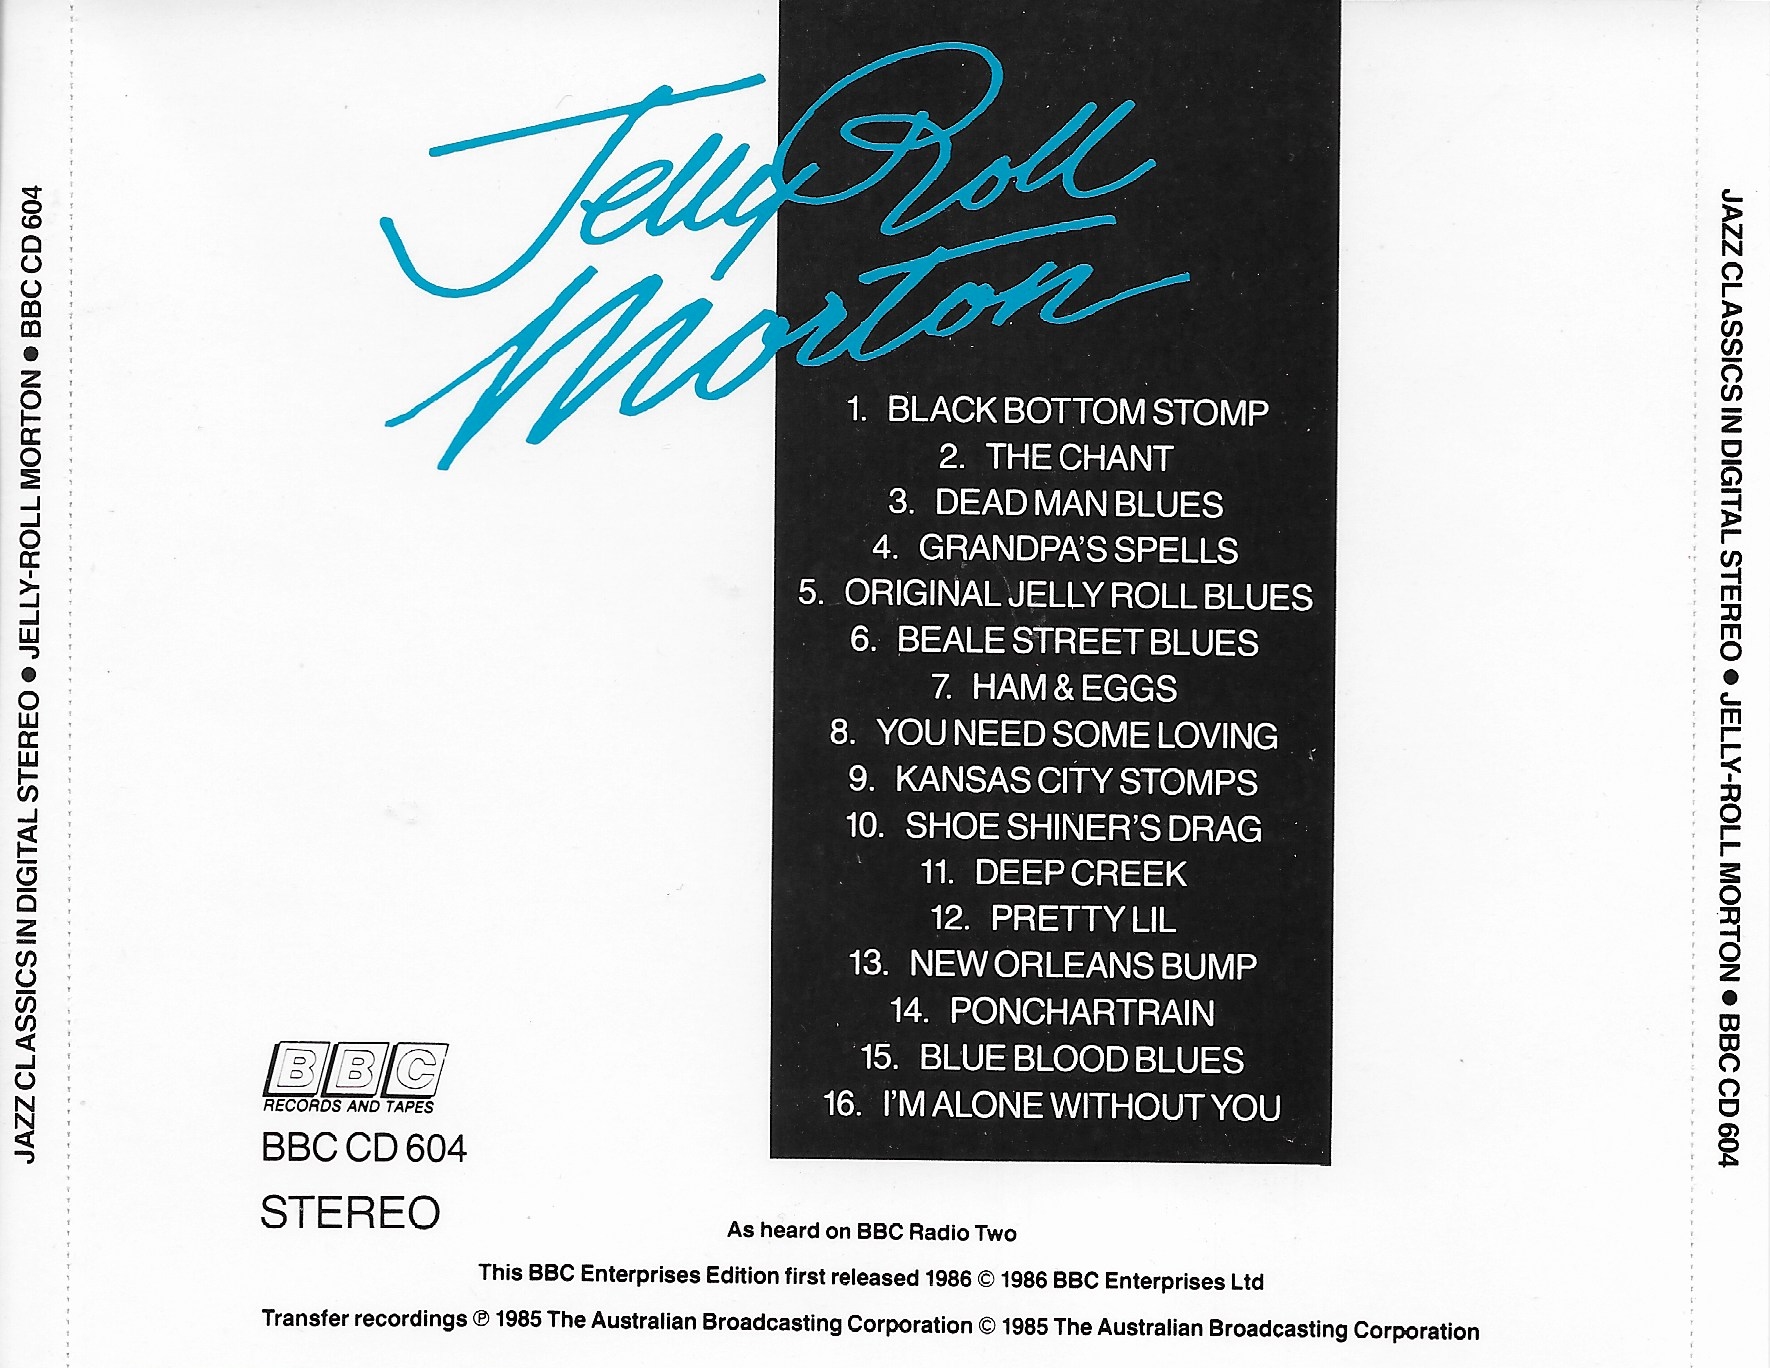 Picture of BBCCD604 Jazz Classics - Jelly Roll Morton by artist Jelly Roll Morton from the BBC records and Tapes library